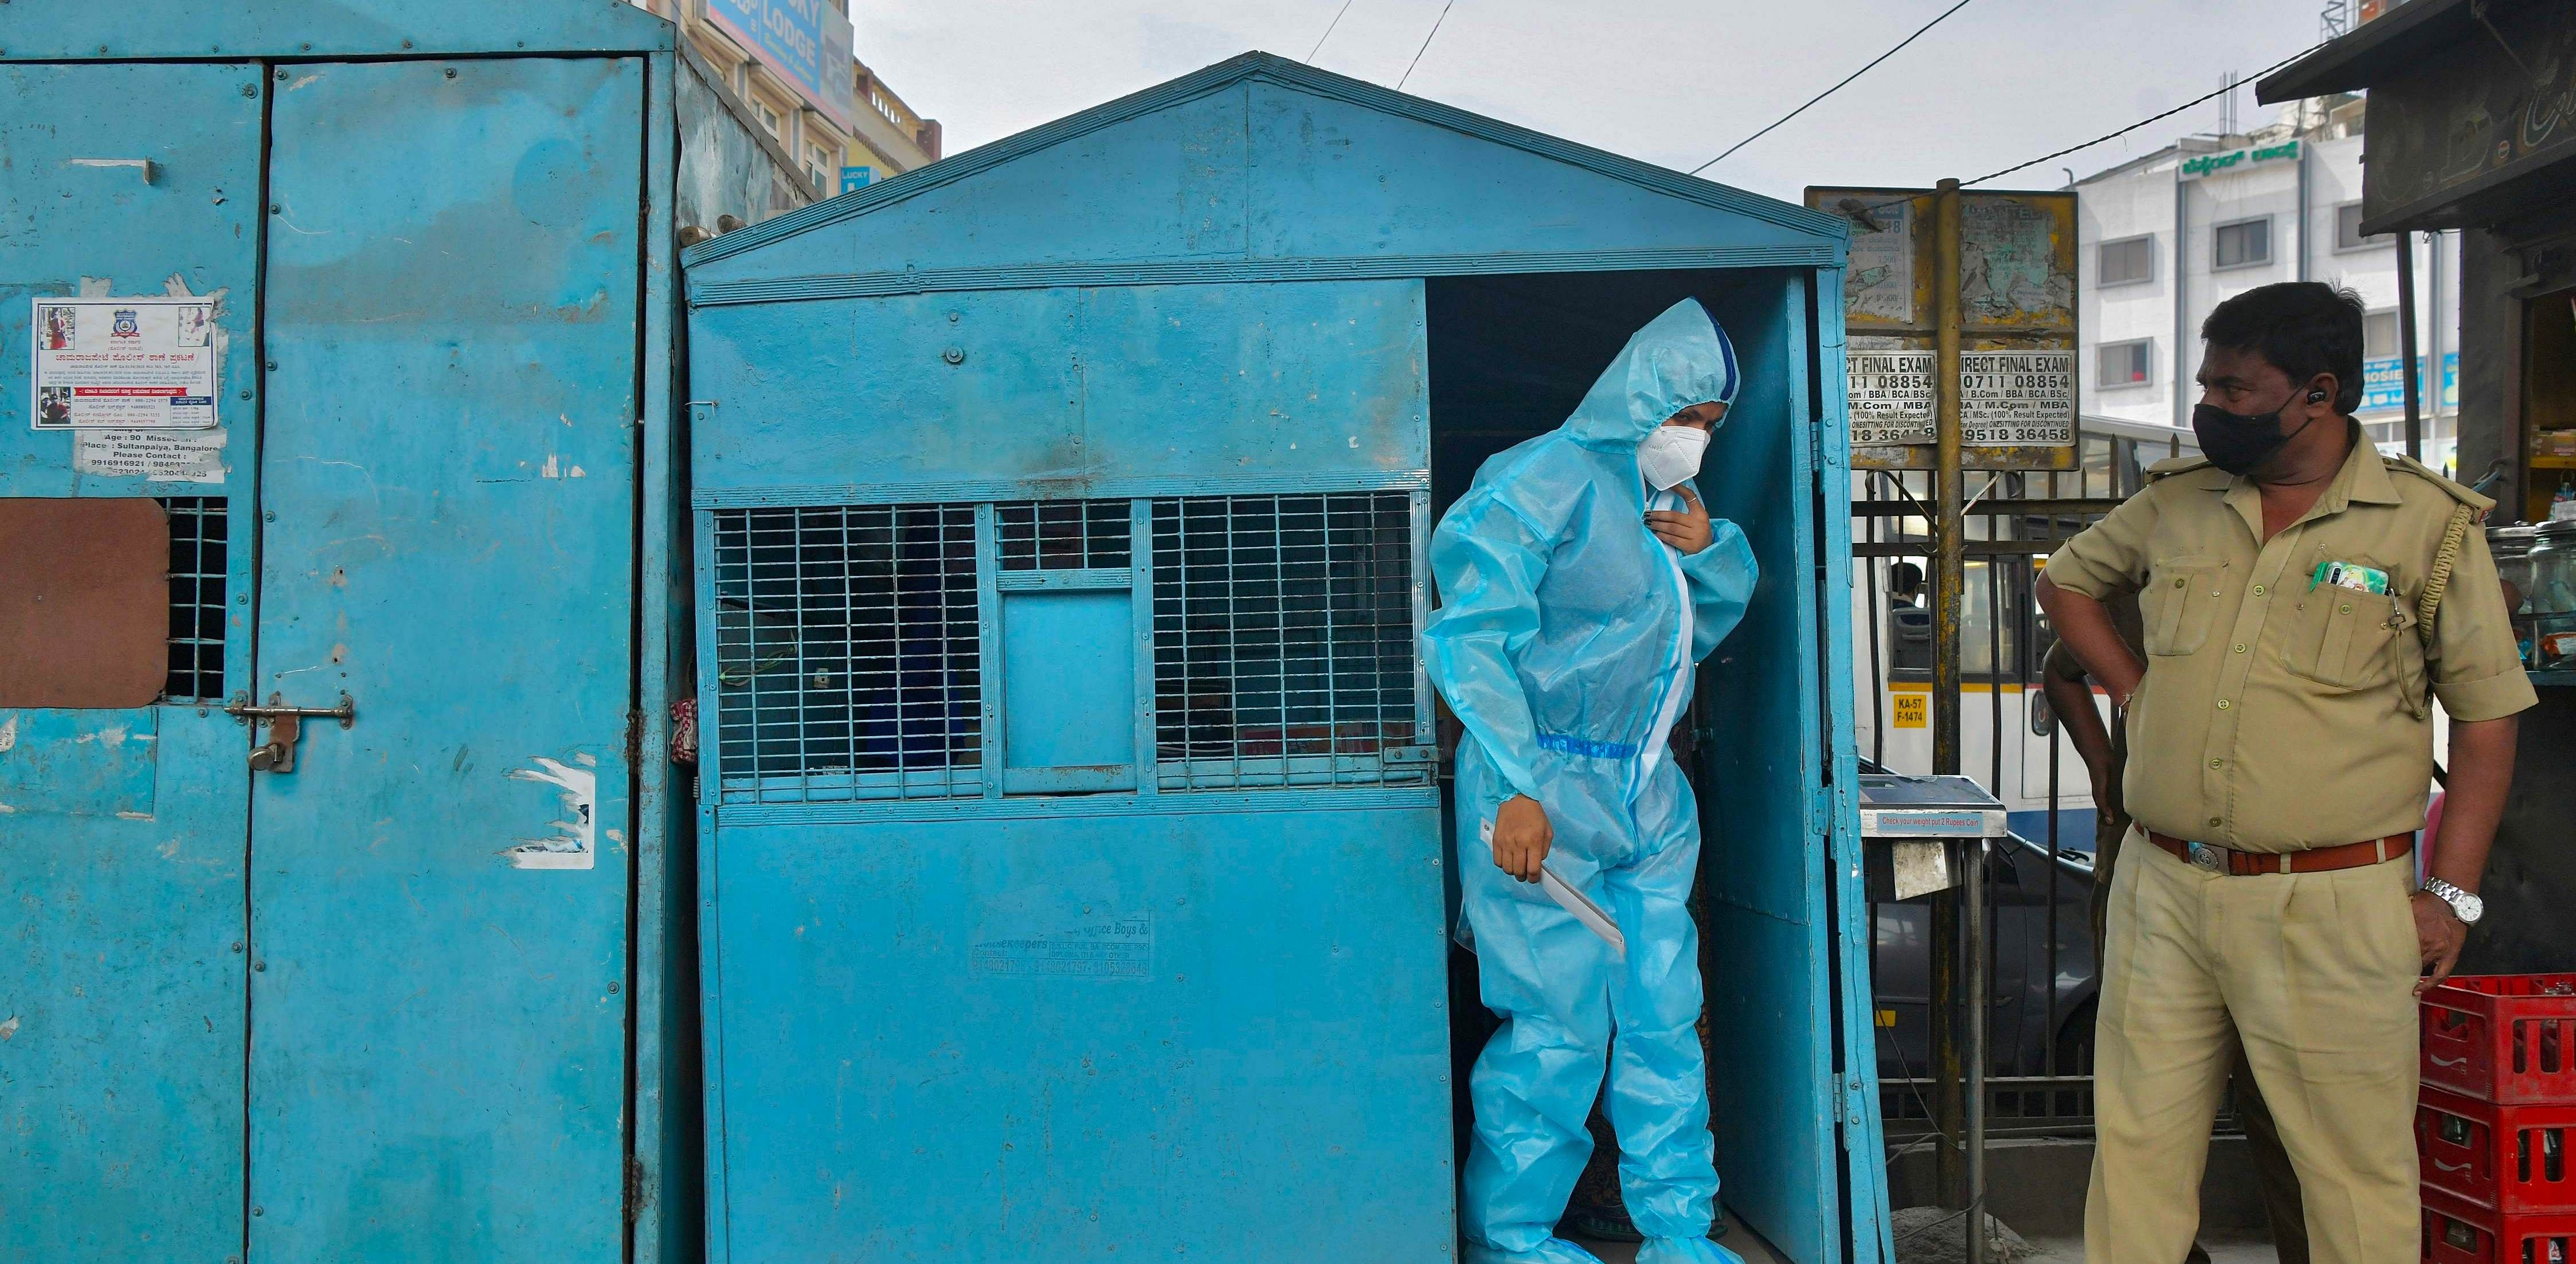 A health worker wearing protective gear prepares to conduct swab tests on people at a mobile Covid-19 coronavirus testing clinic at a bus stand in Bangalore. Credit: AFP